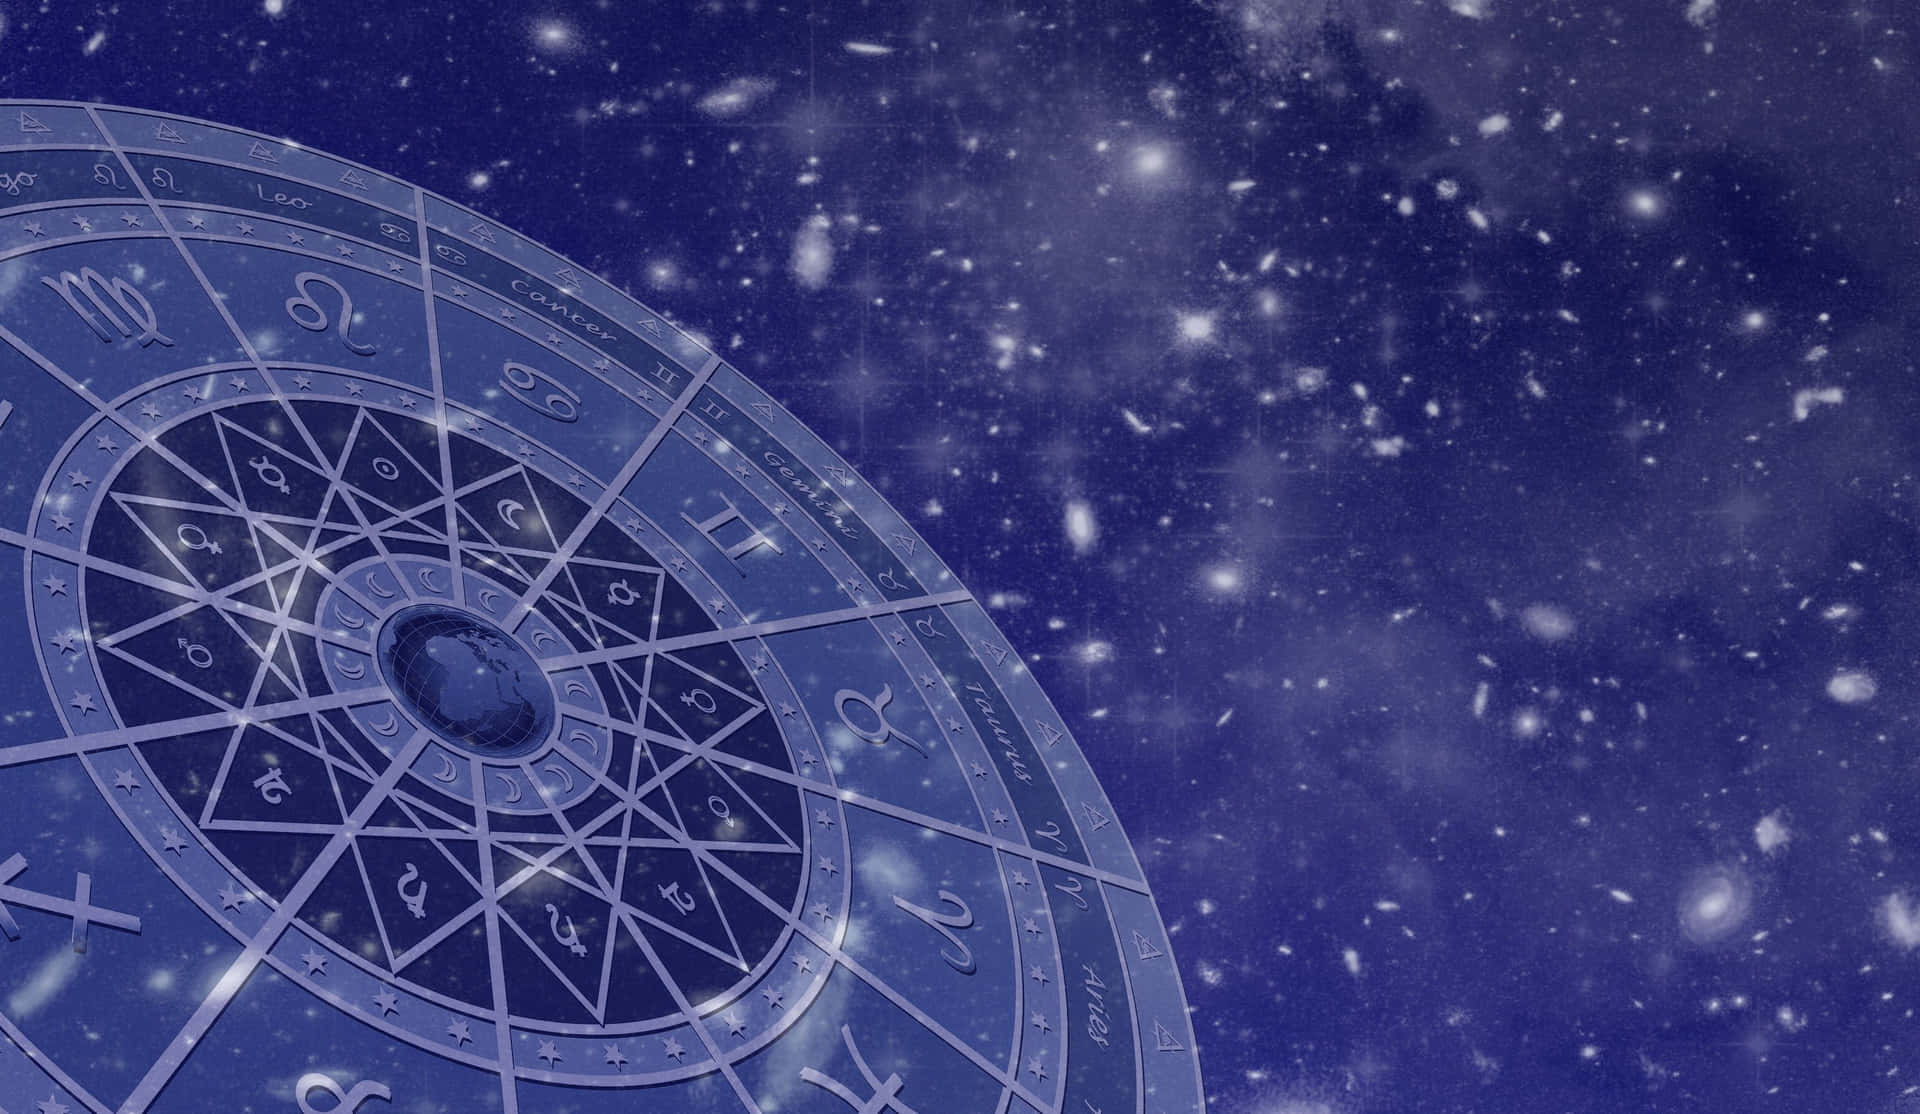 The stunning Zodiac Wheel of Astrological Signs